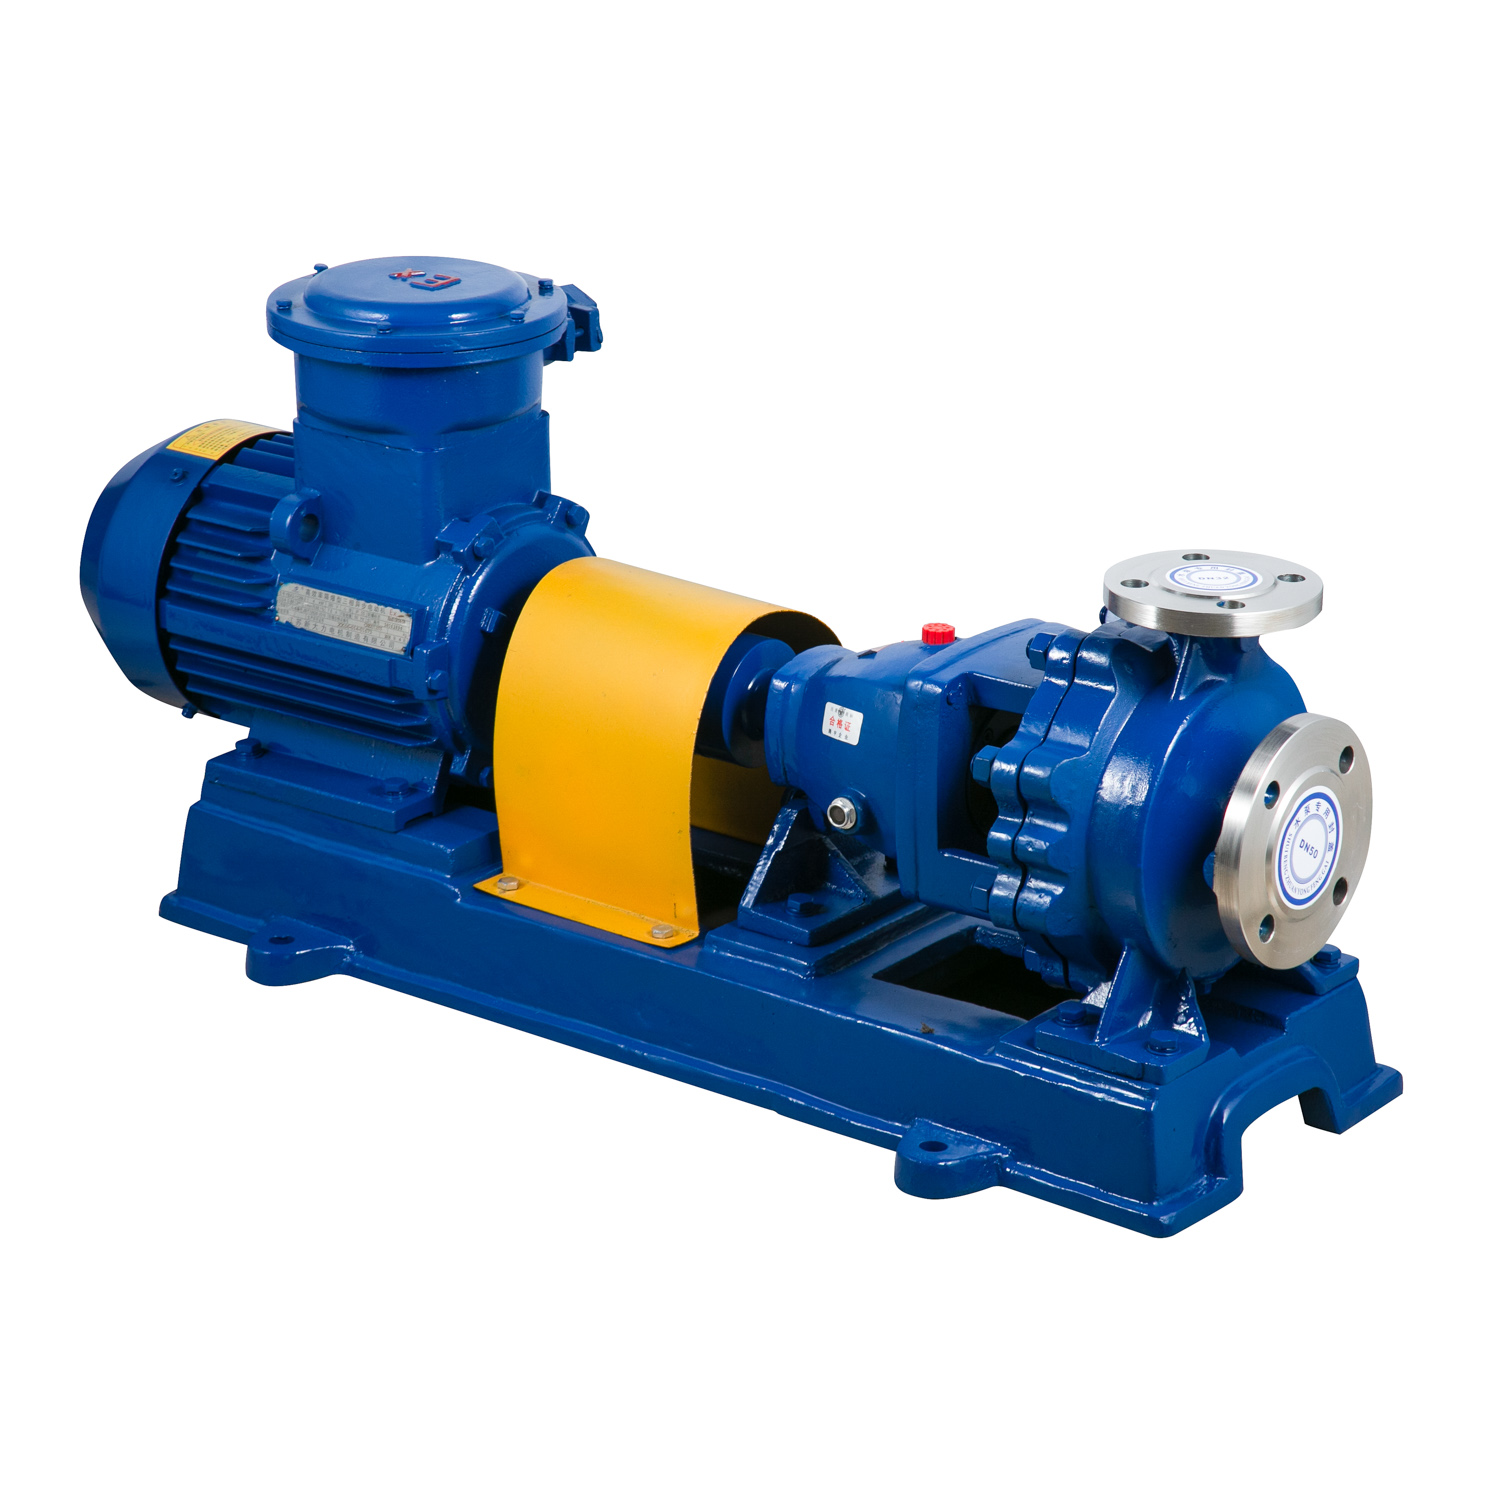 IH Single Stage &Single Suction Centrifugal Chemical Pump